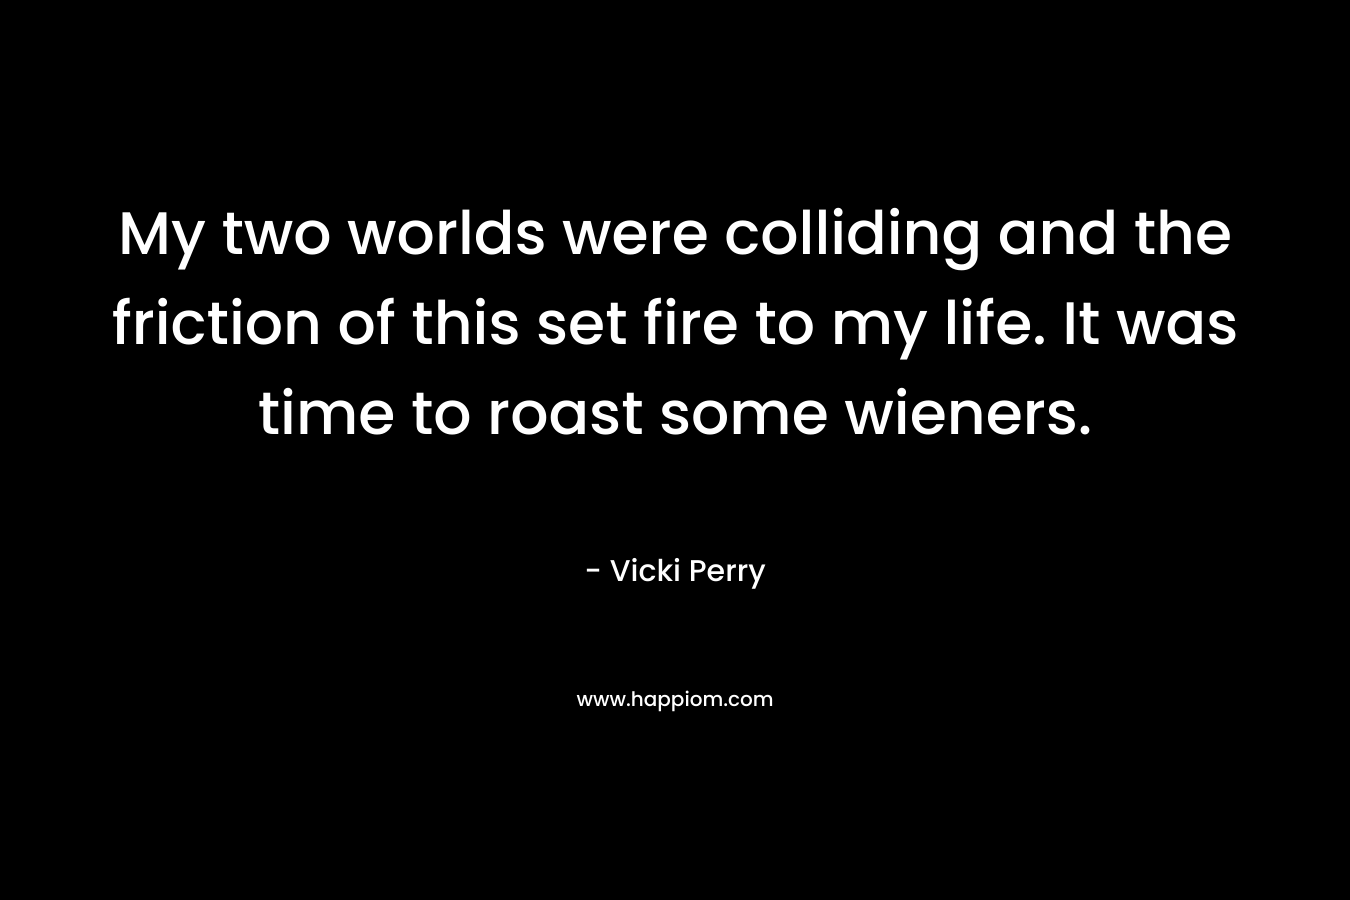 My two worlds were colliding and the friction of this set fire to my life. It was time to roast some wieners. – Vicki Perry